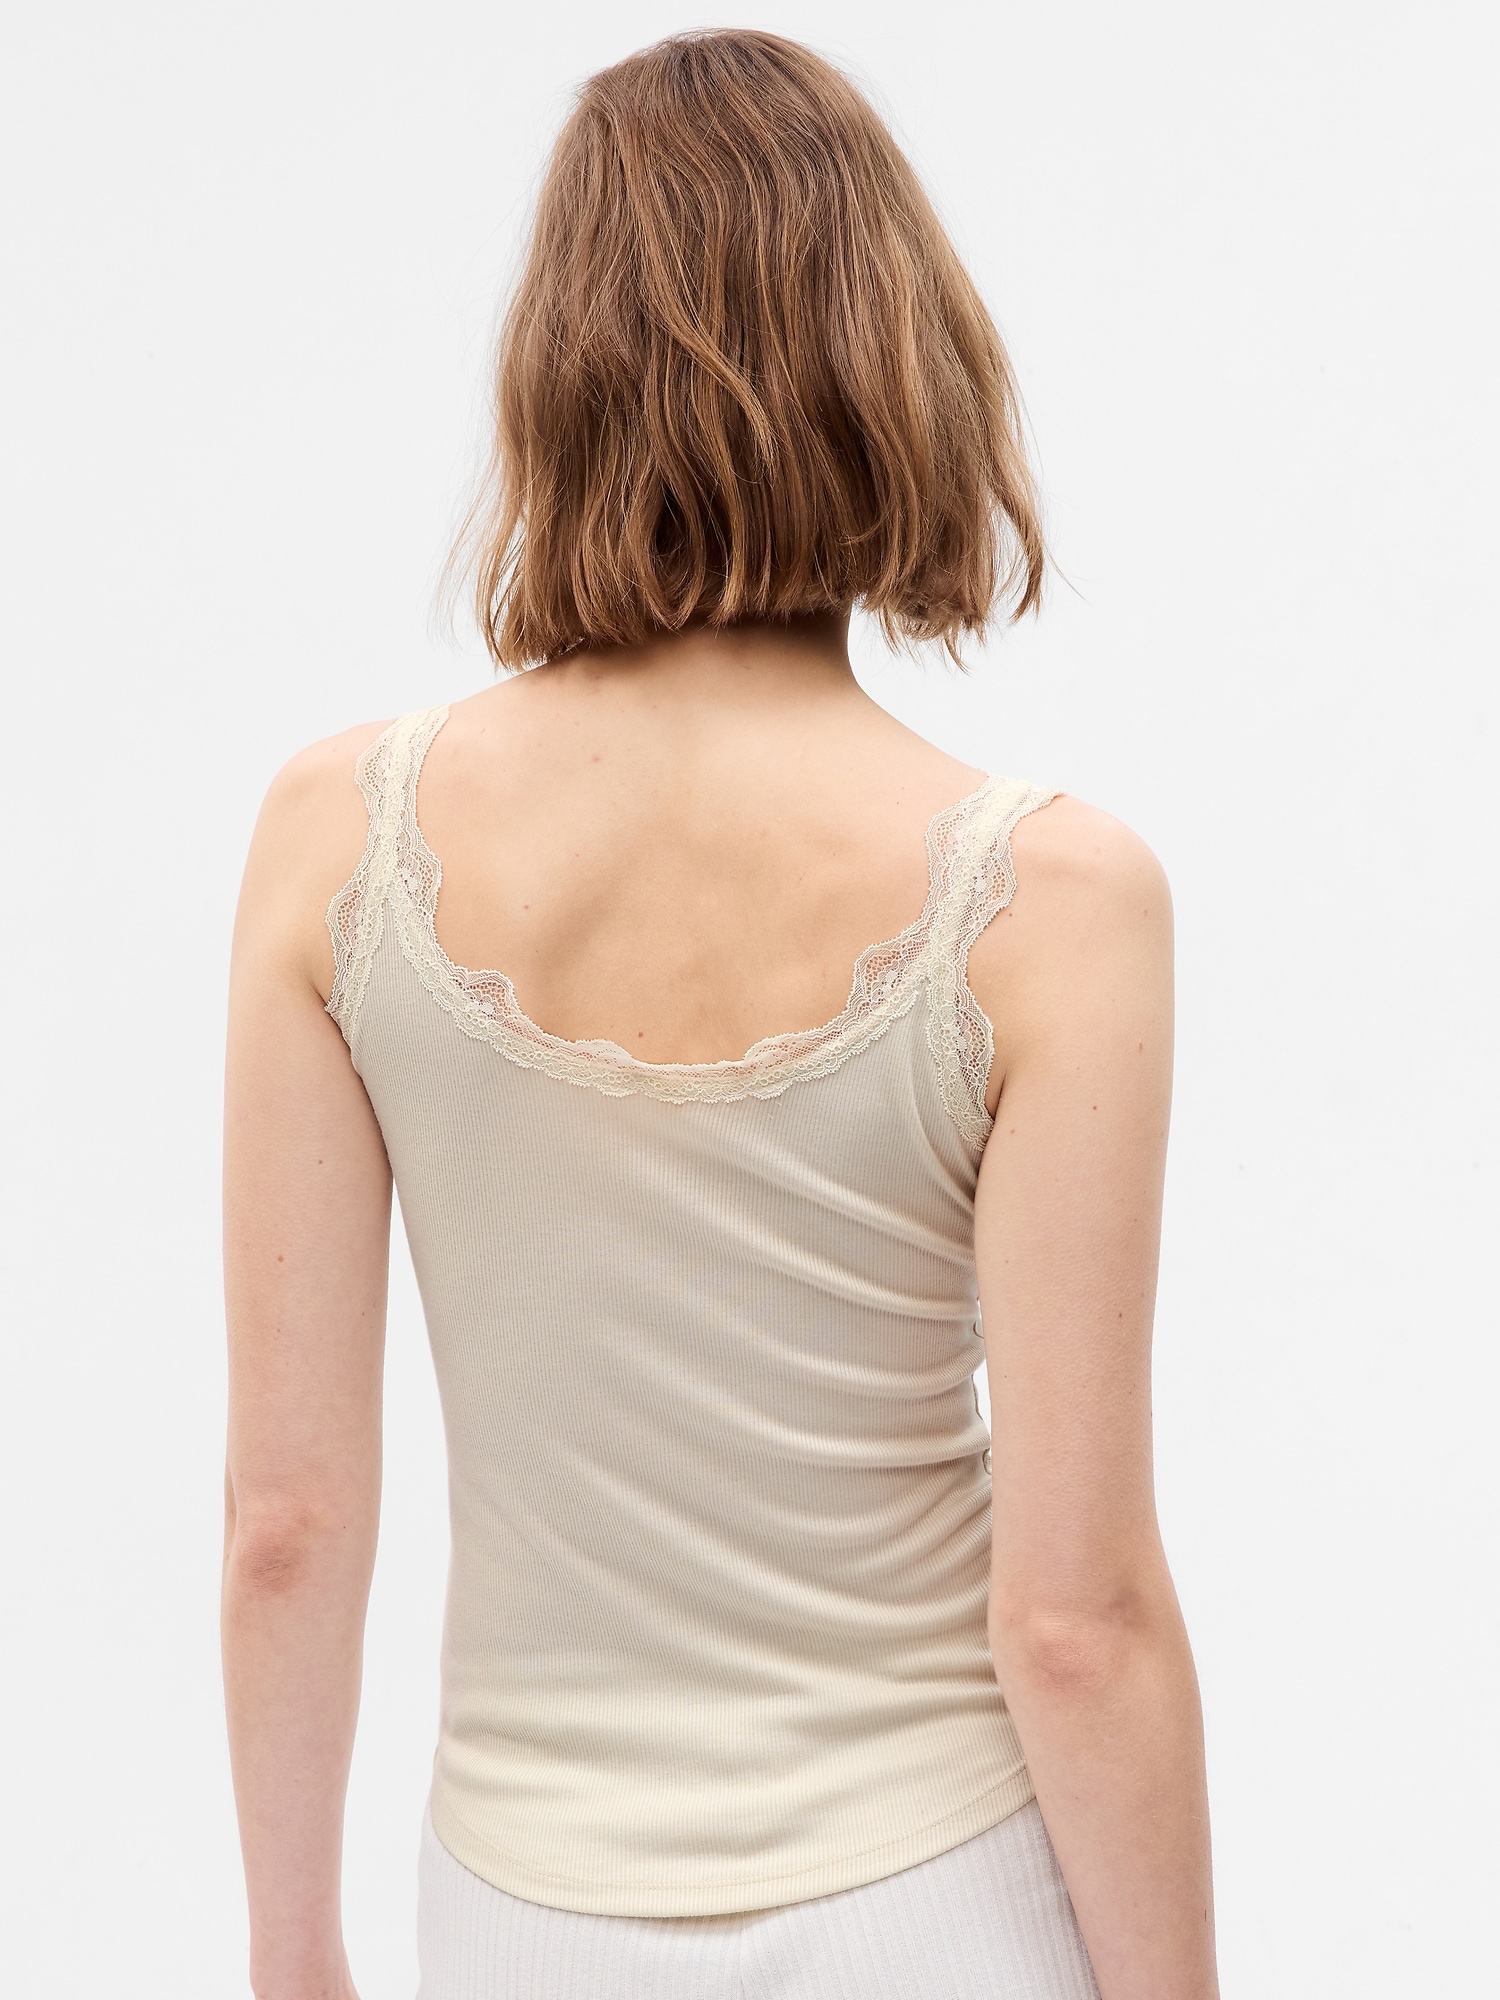 Rosemunde: Silk and Lace Camisole with Lace Trim at Bottom (Many